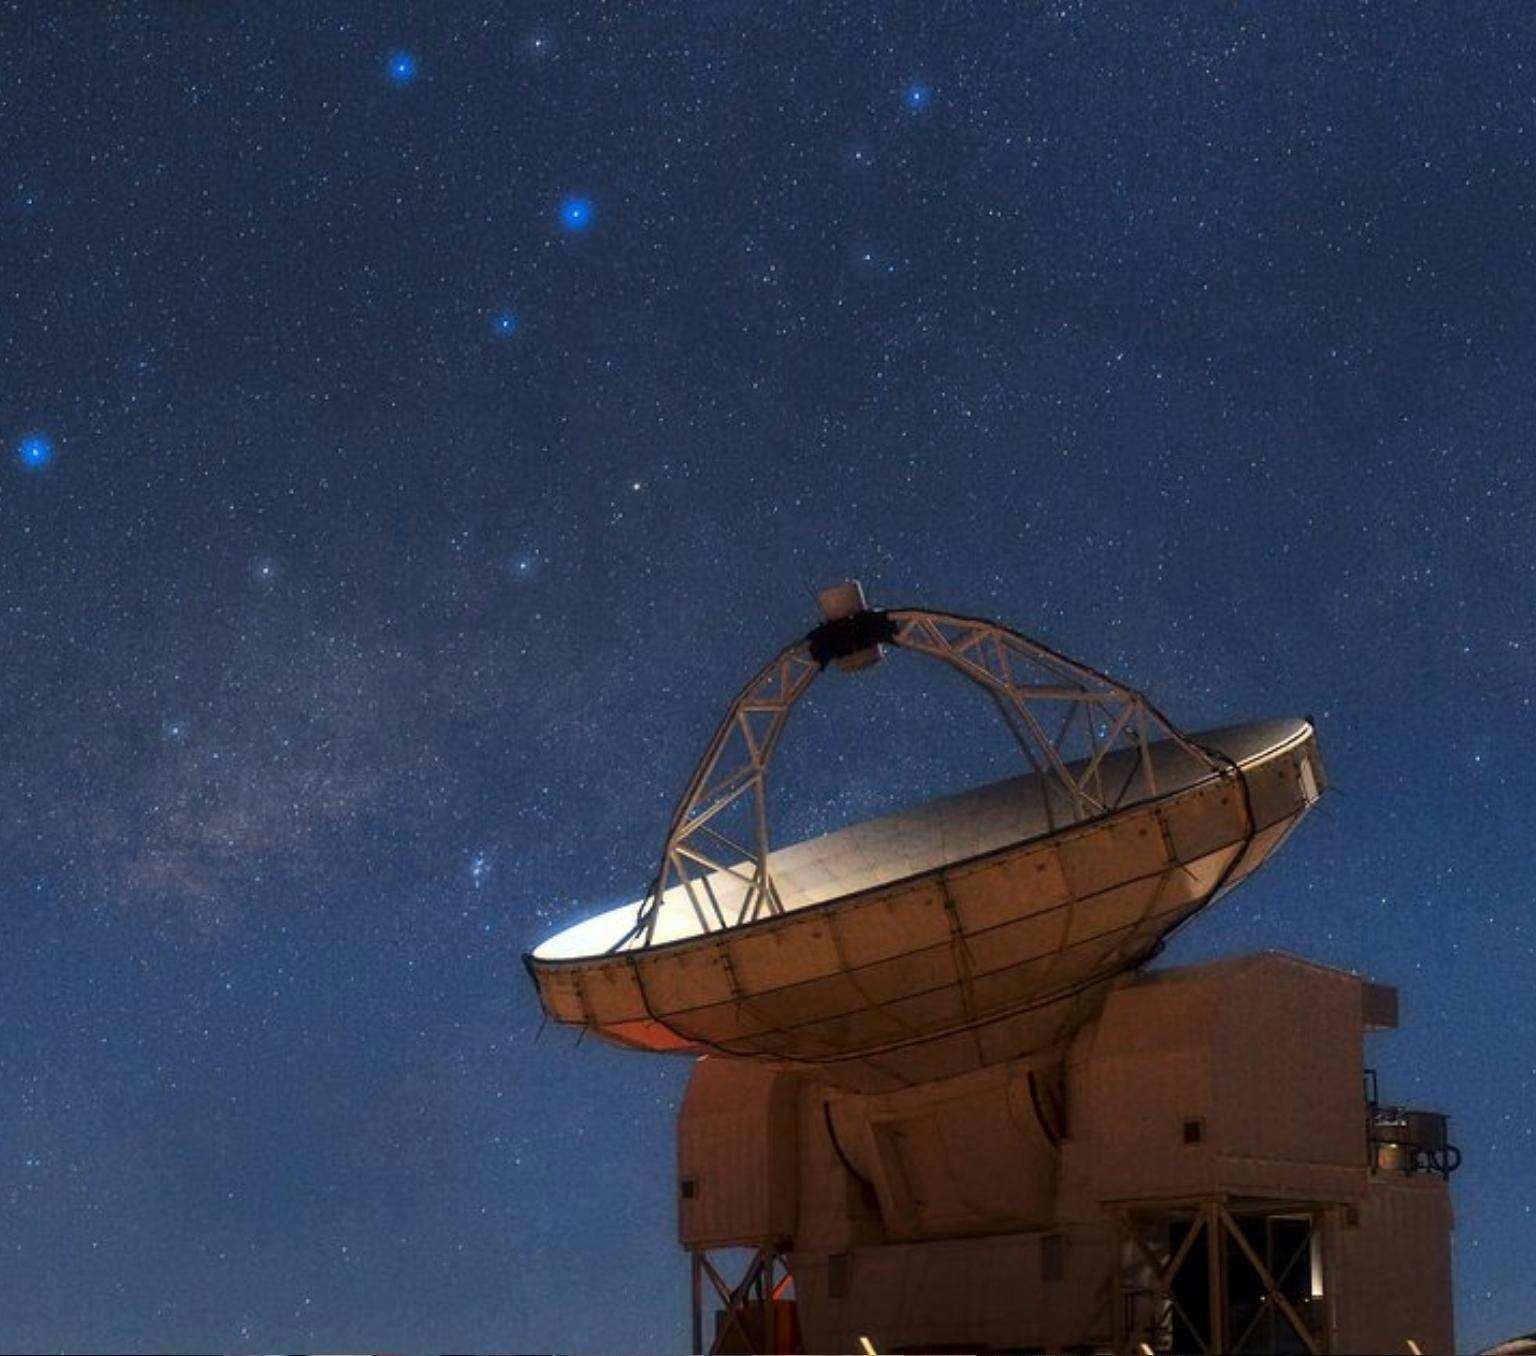 telescope with large metal dish is visible in front of a starry night sky